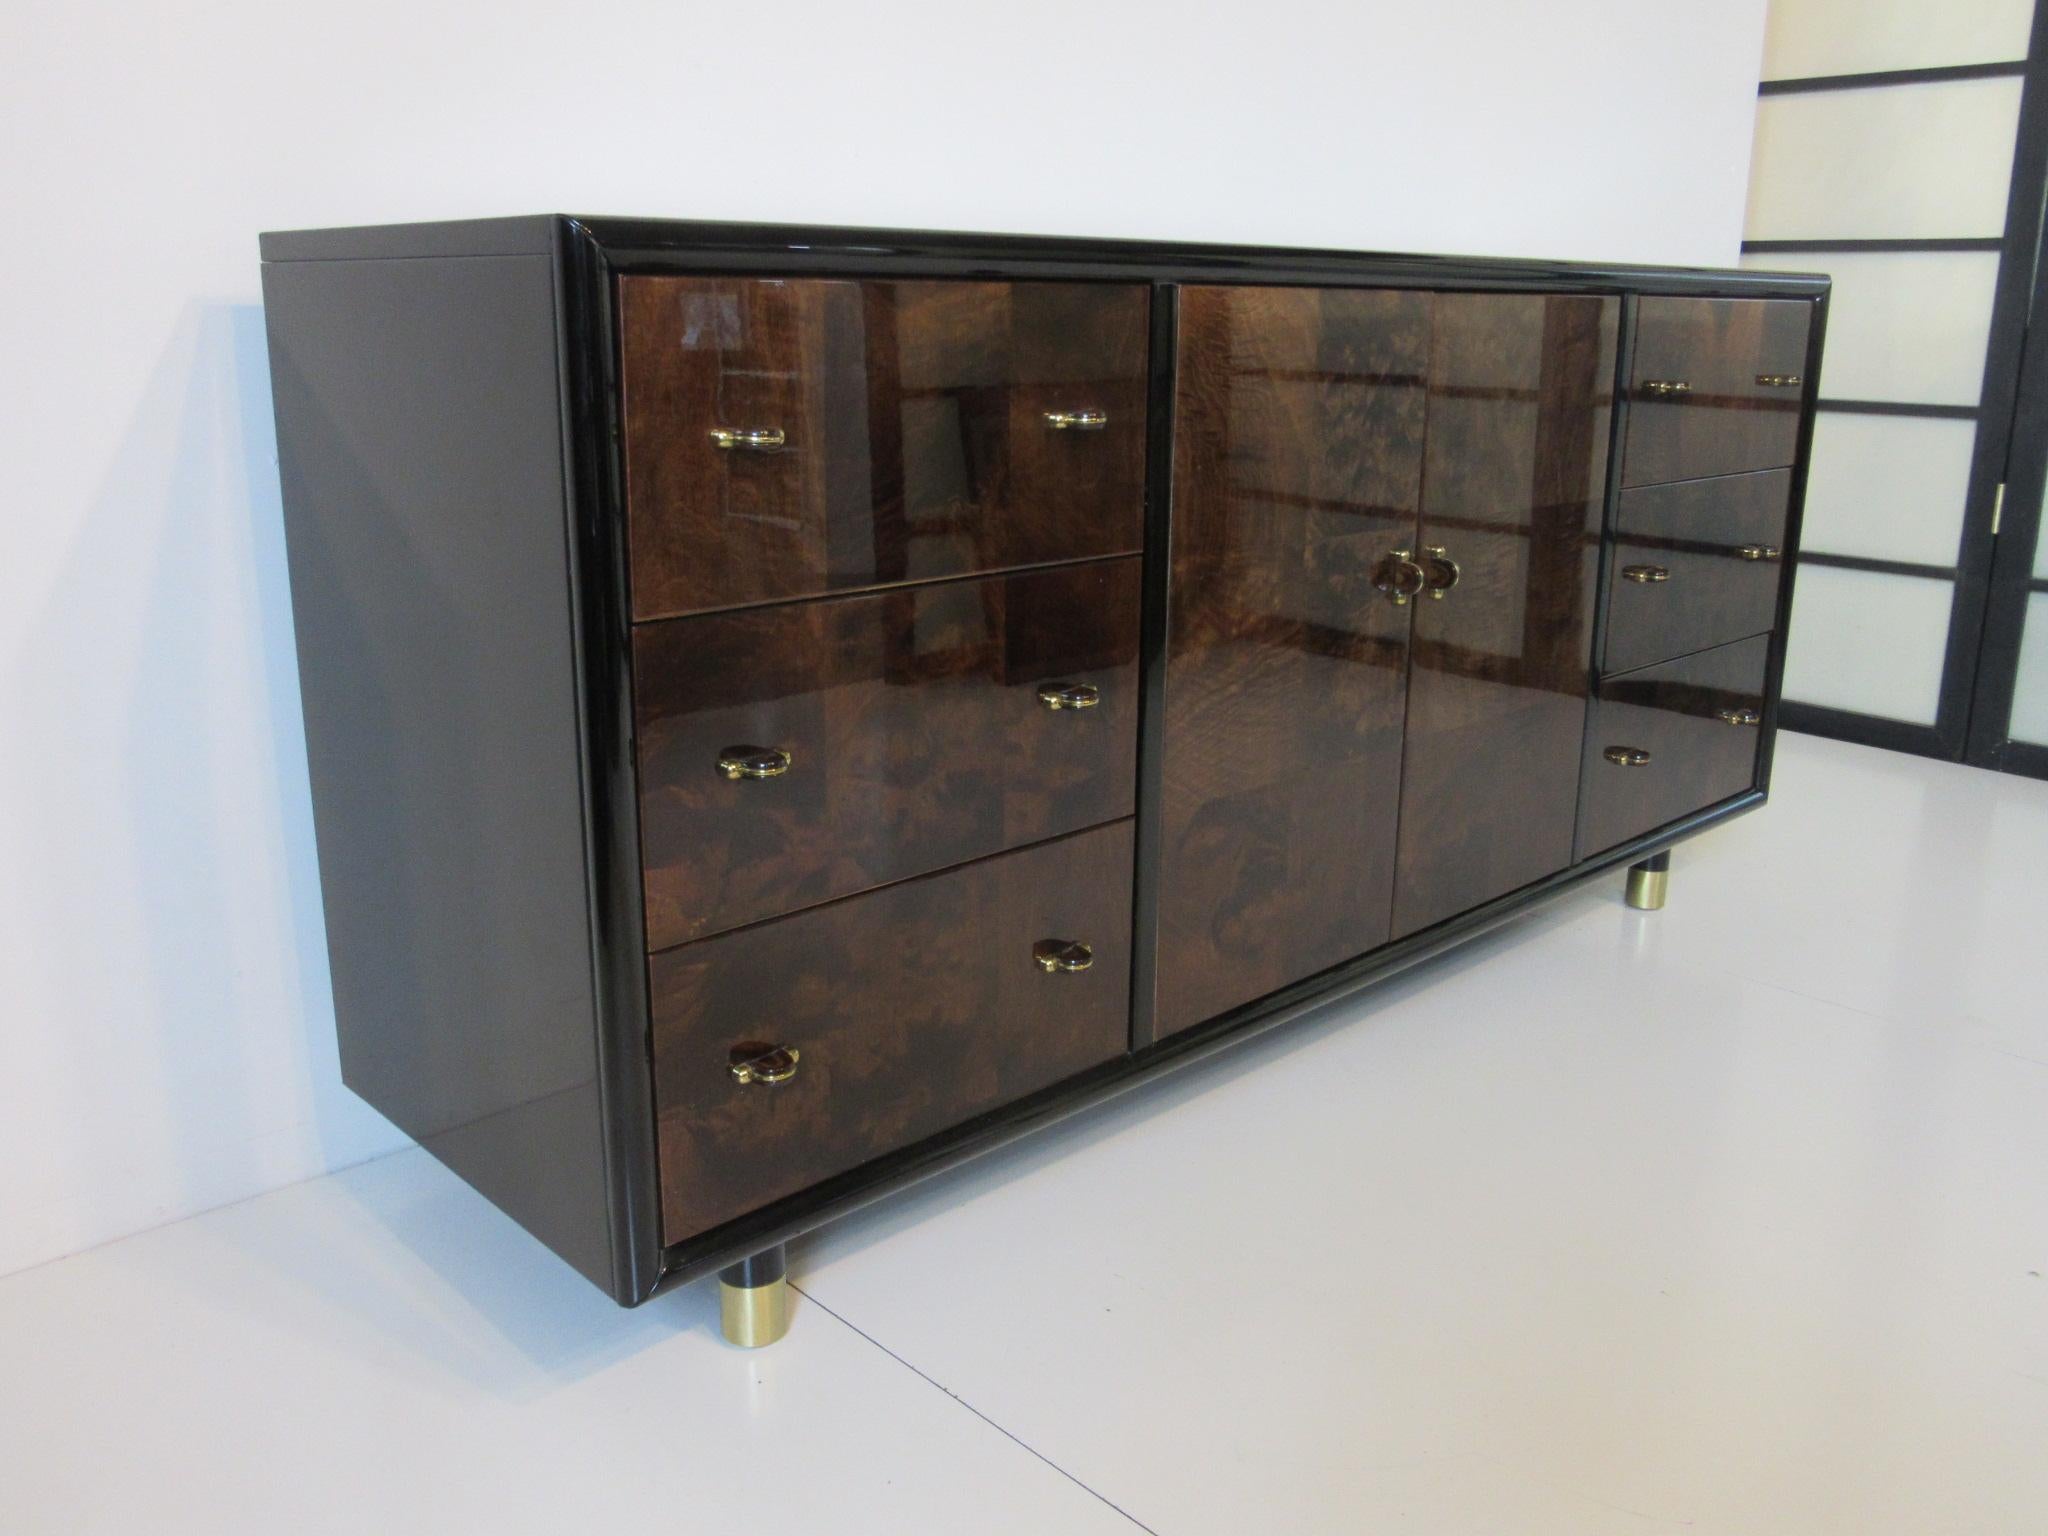 A high gloss black lacquer chest / cabinet with rich burl wood drawer fronts and doors, three drawers to each side and double doors with one adjustable shelve. This well-crafted and quality
piece has detailed matching wood pulls with brass to each